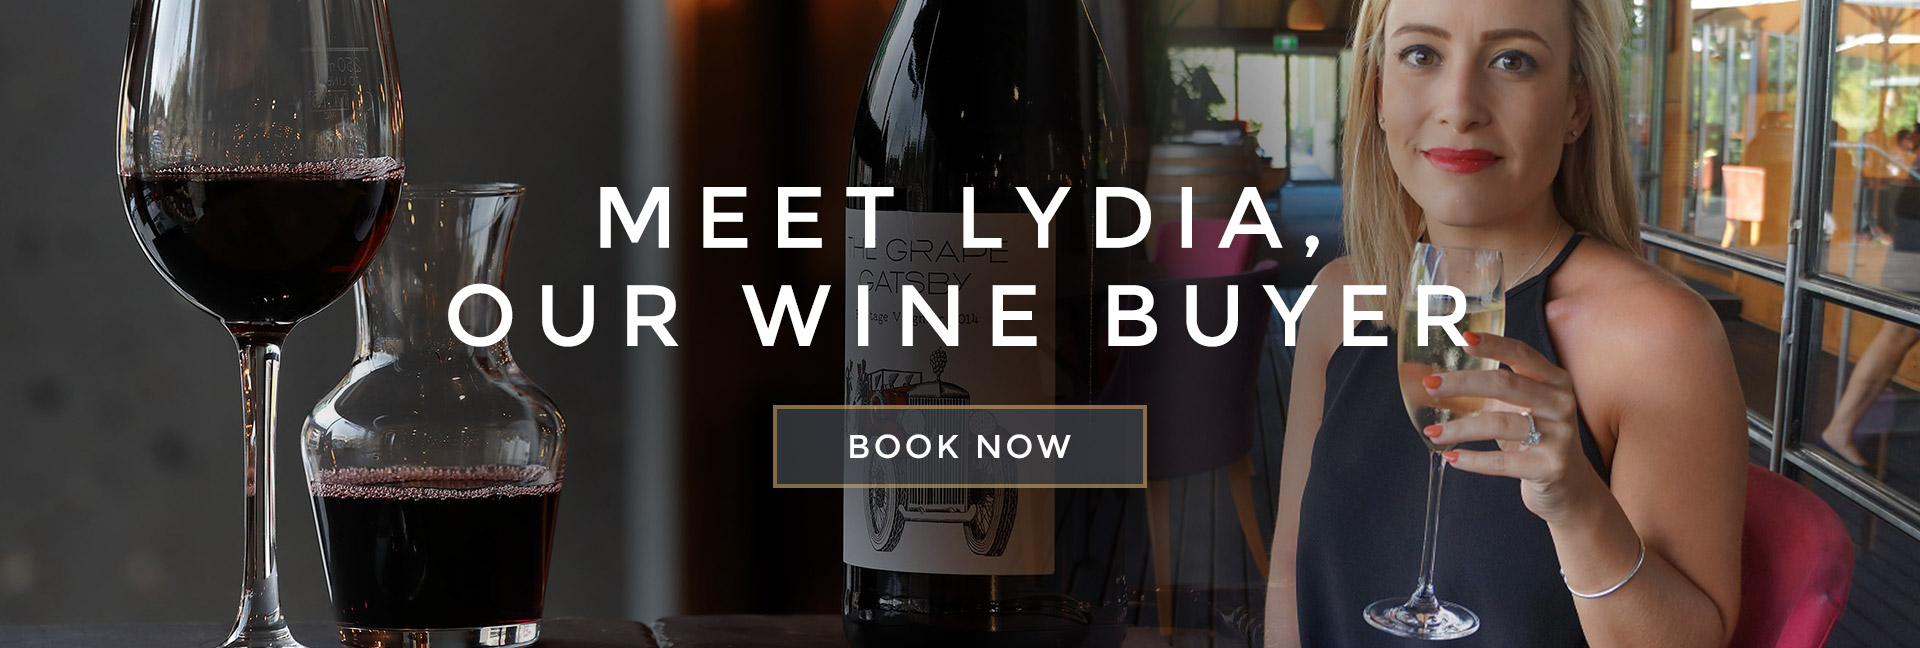 Meet Lydia, our wine buyer at All Bar One Cambridge